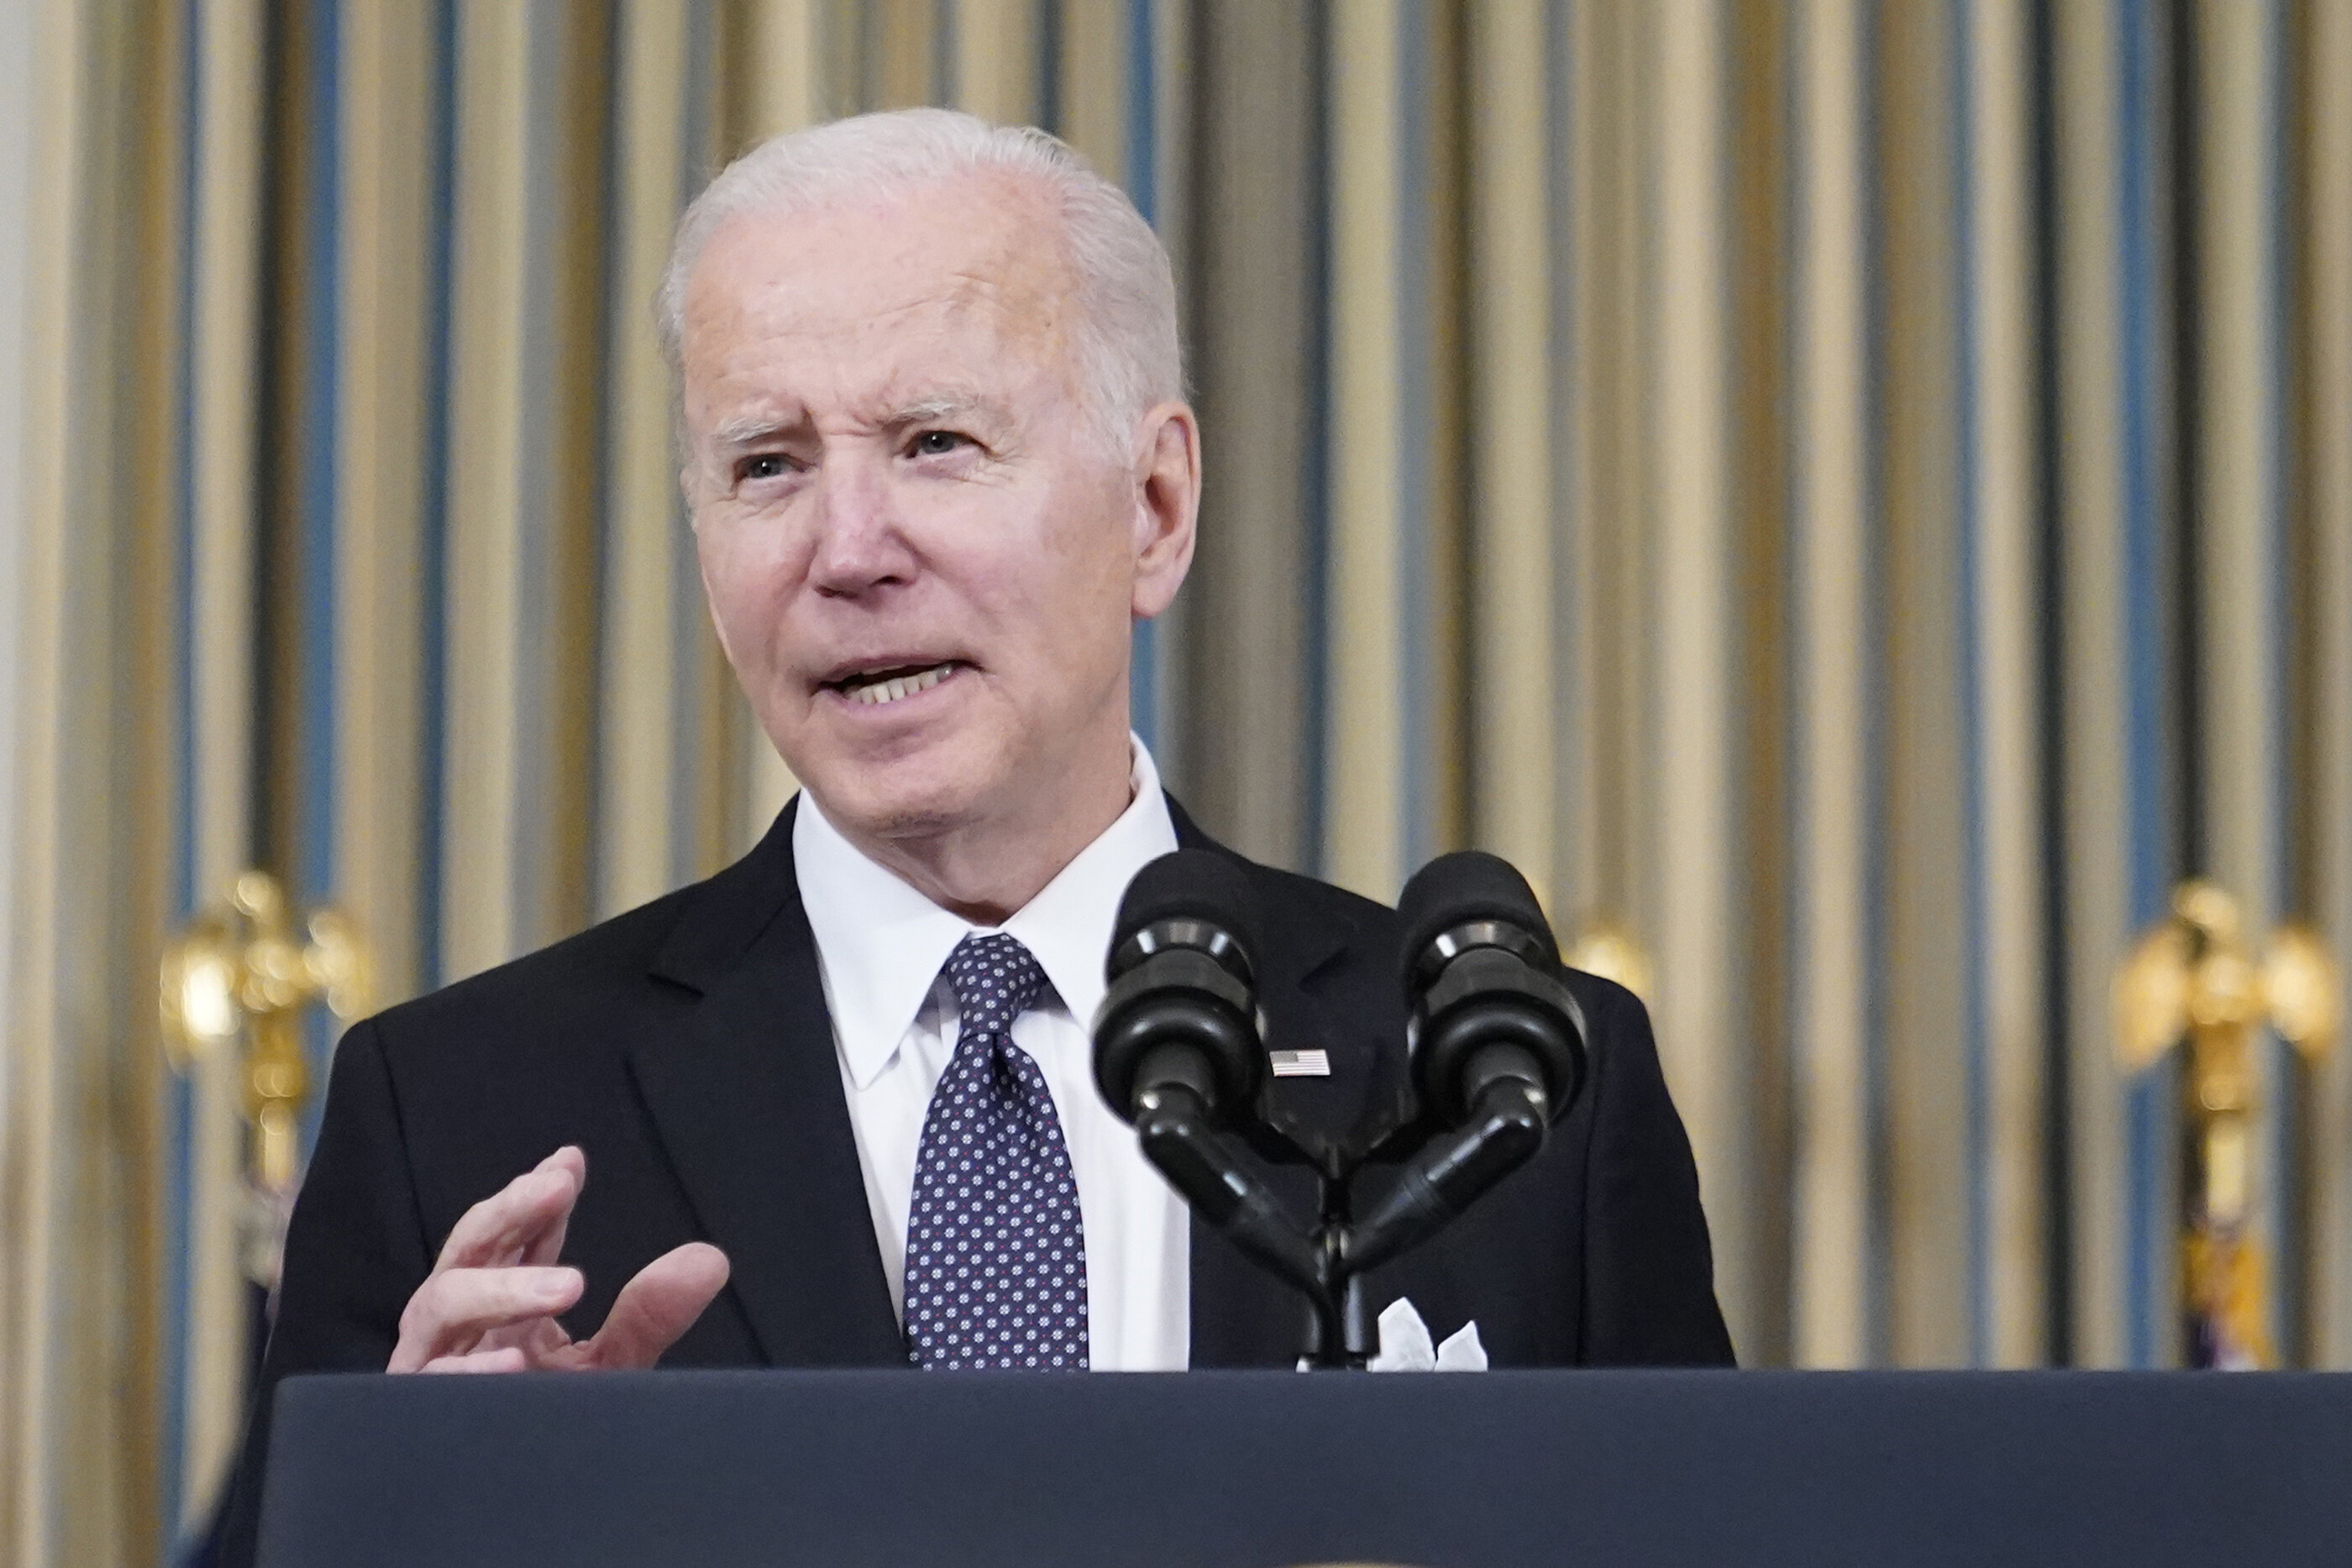 #Biden eyes boost to mining of minerals for electric vehicles